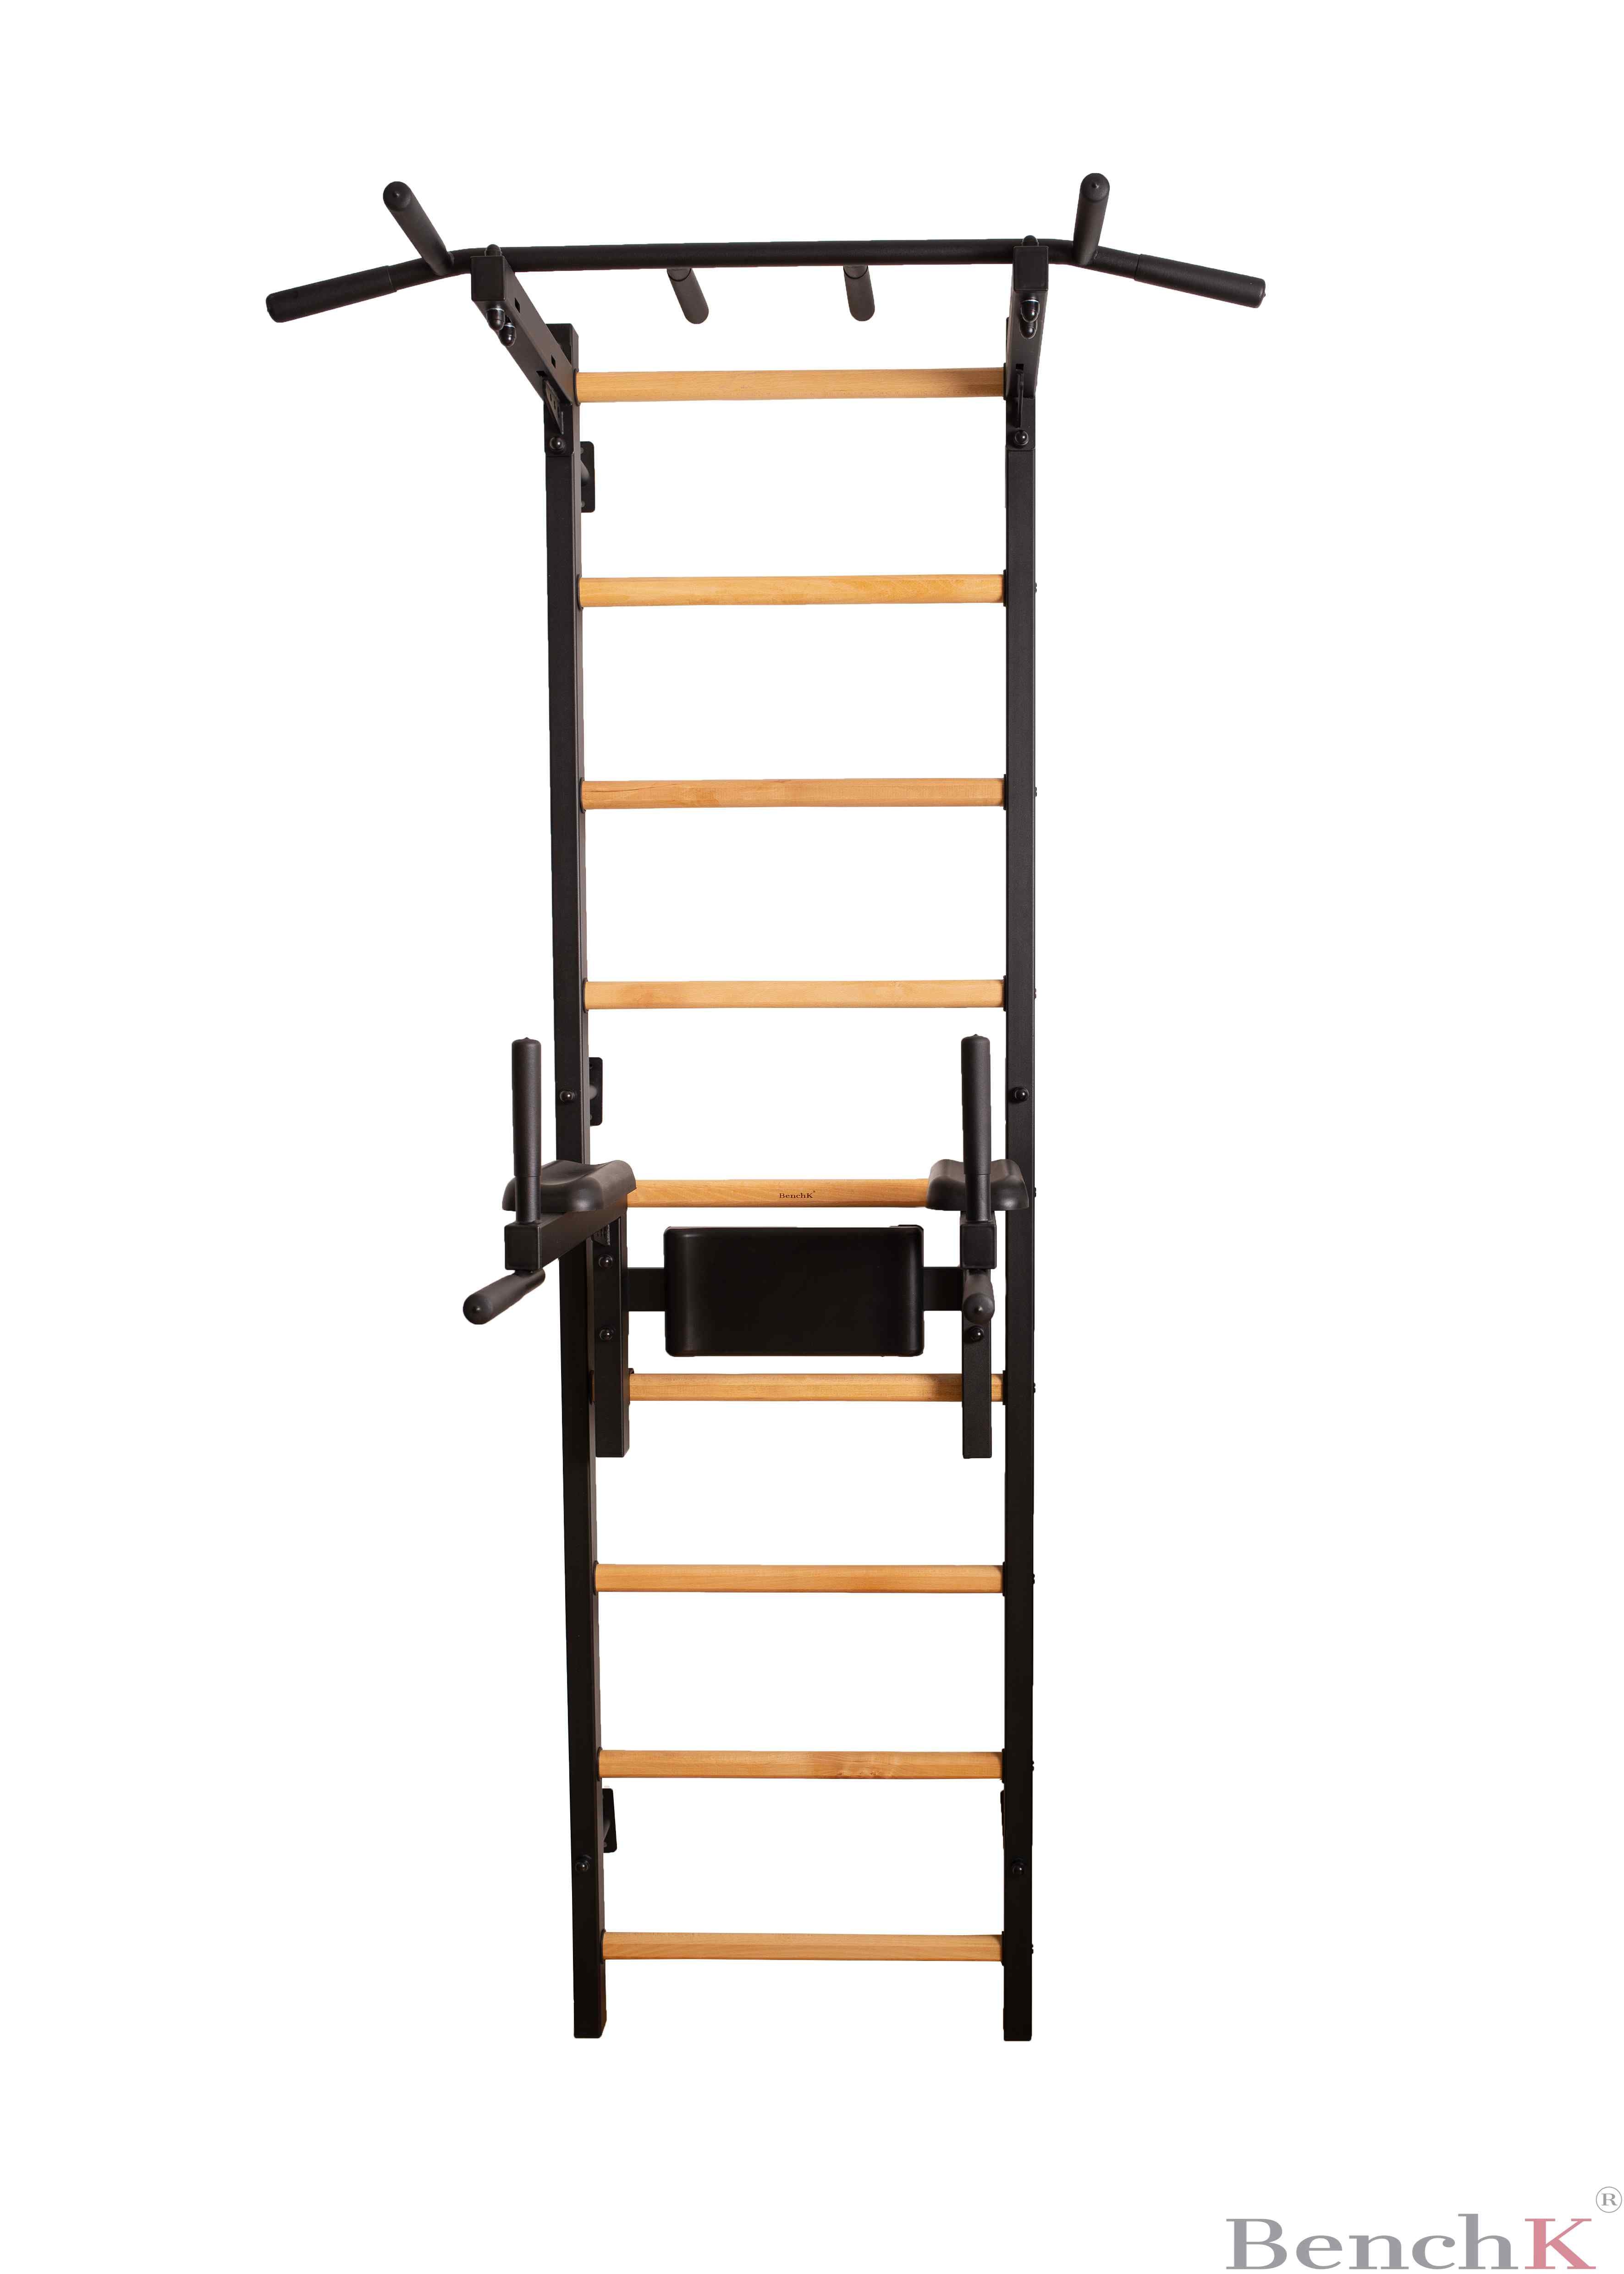 BenchK 722 BenchK Wall Bars with Fixed Pull Up Bar & Dip Bar Swedish Ladder Home Gym Equipment